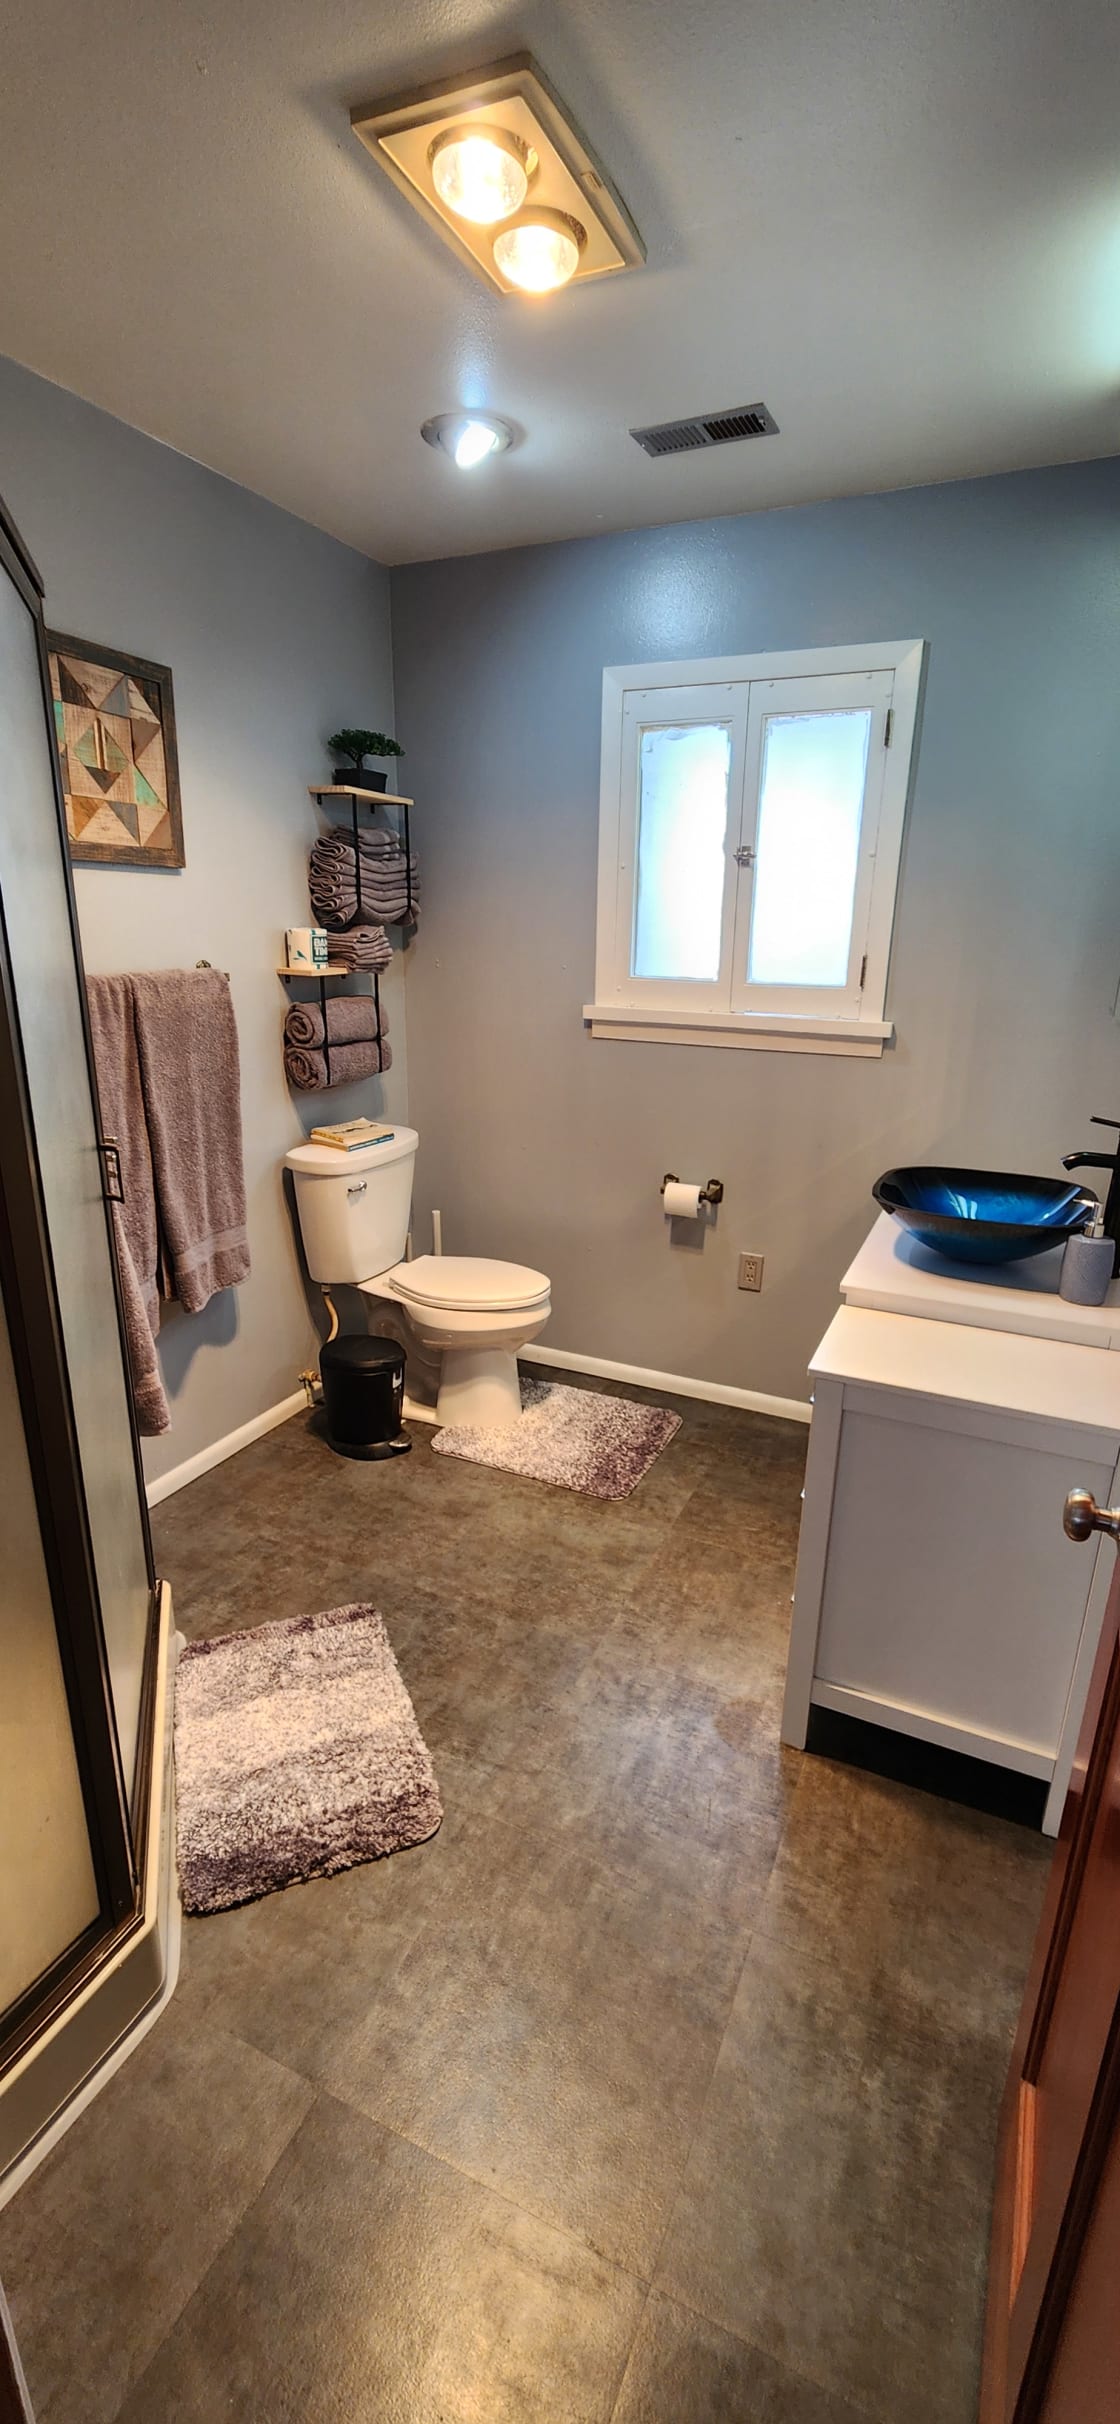 Nicely Remodeled bathroom with a toilet, sink, and a hot water shower.